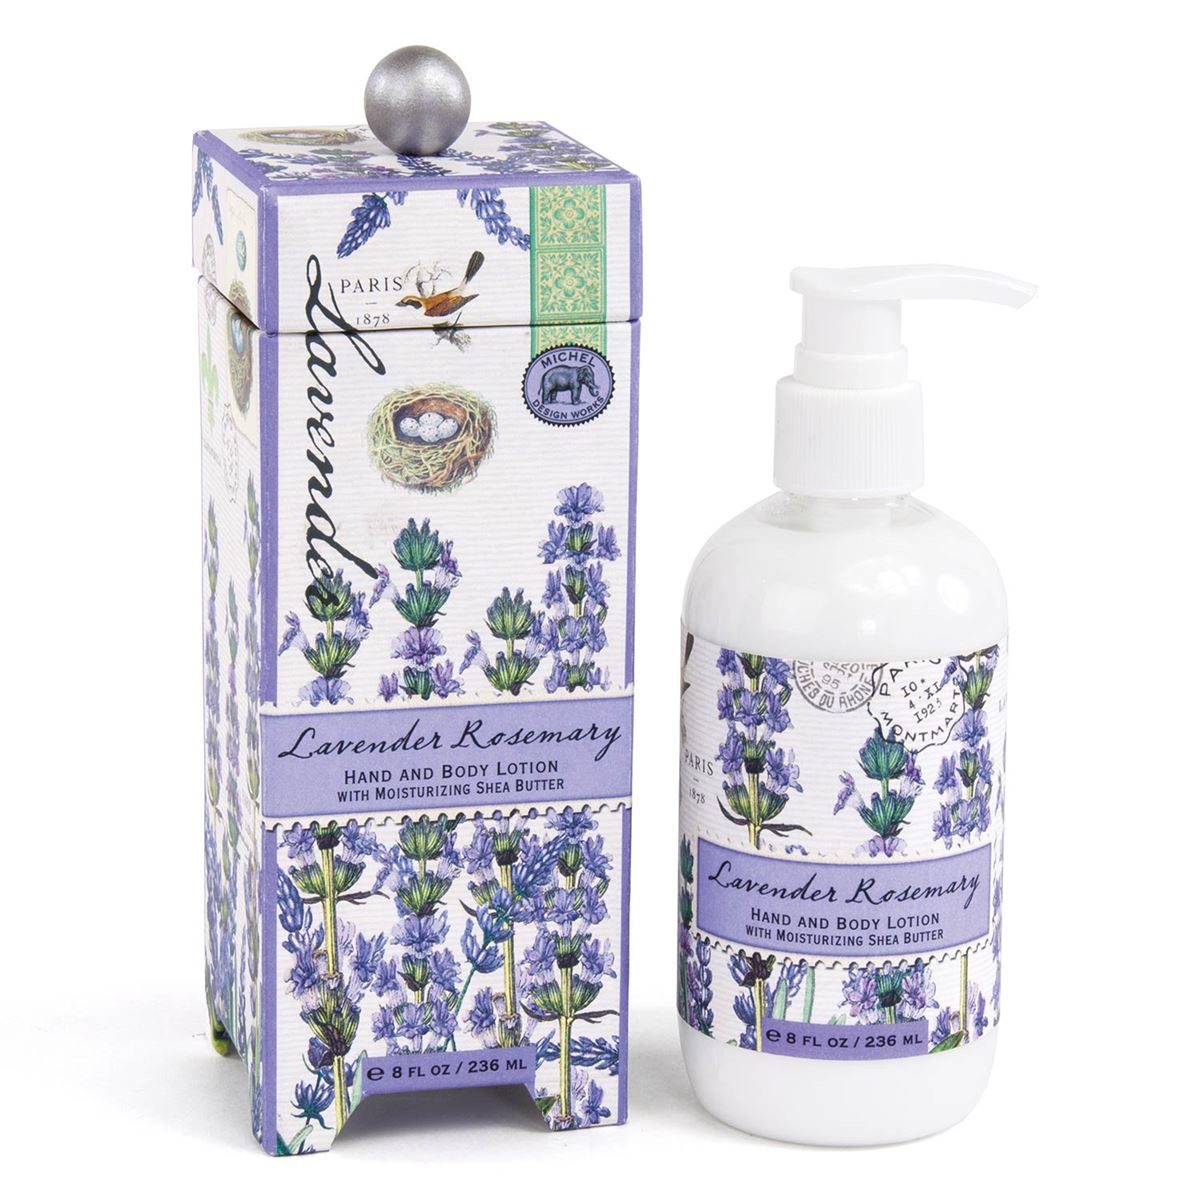 Lavender Rosemary Lotion Silky Shea Butter and Aloe Infusion with Distinctive Botanical Scent